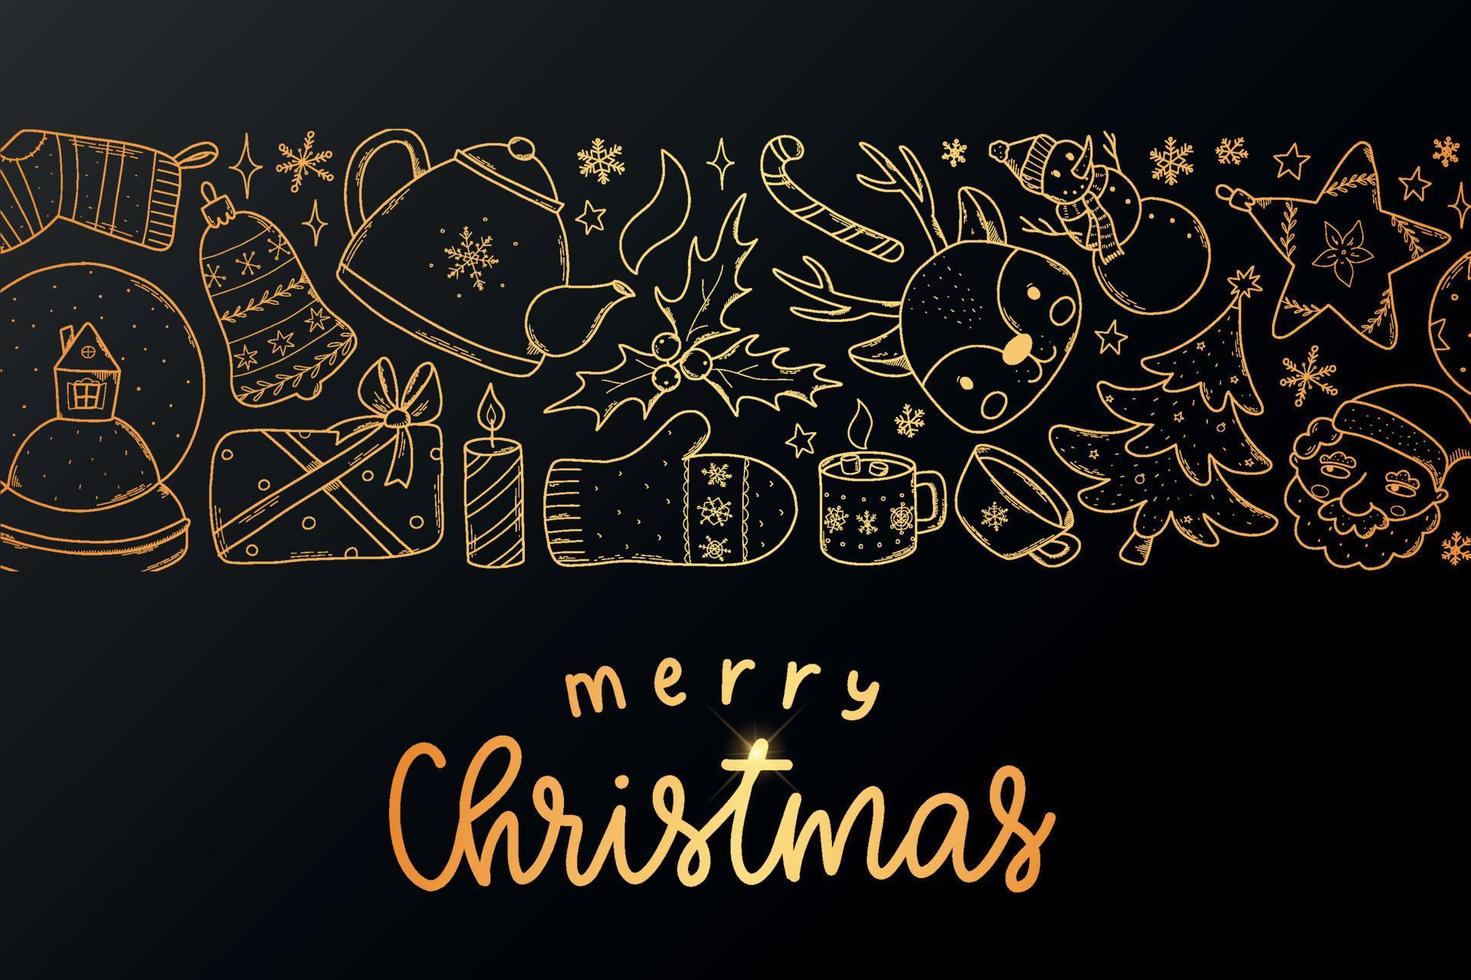 Christmas banner decorated with doodles and lettering quote on black background. Good for invitations, prints, cards, posters, signs, banners, etc. EPS 10 vector